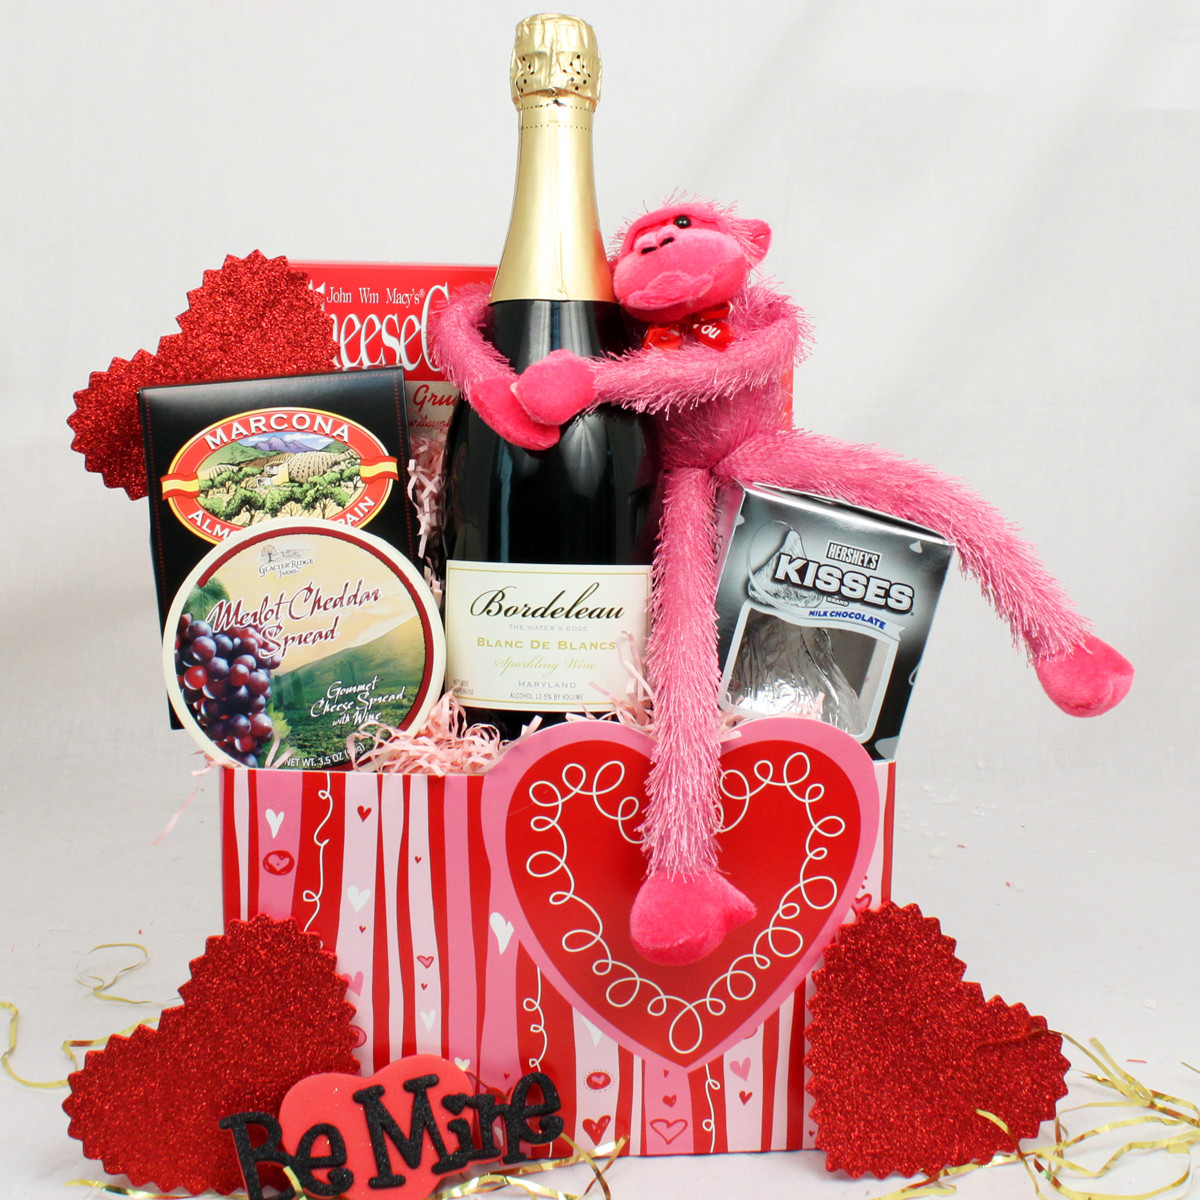 Valentines Creative Gift Ideas
 Creative and Thoughtful Valentine’s Day Gifts for Her